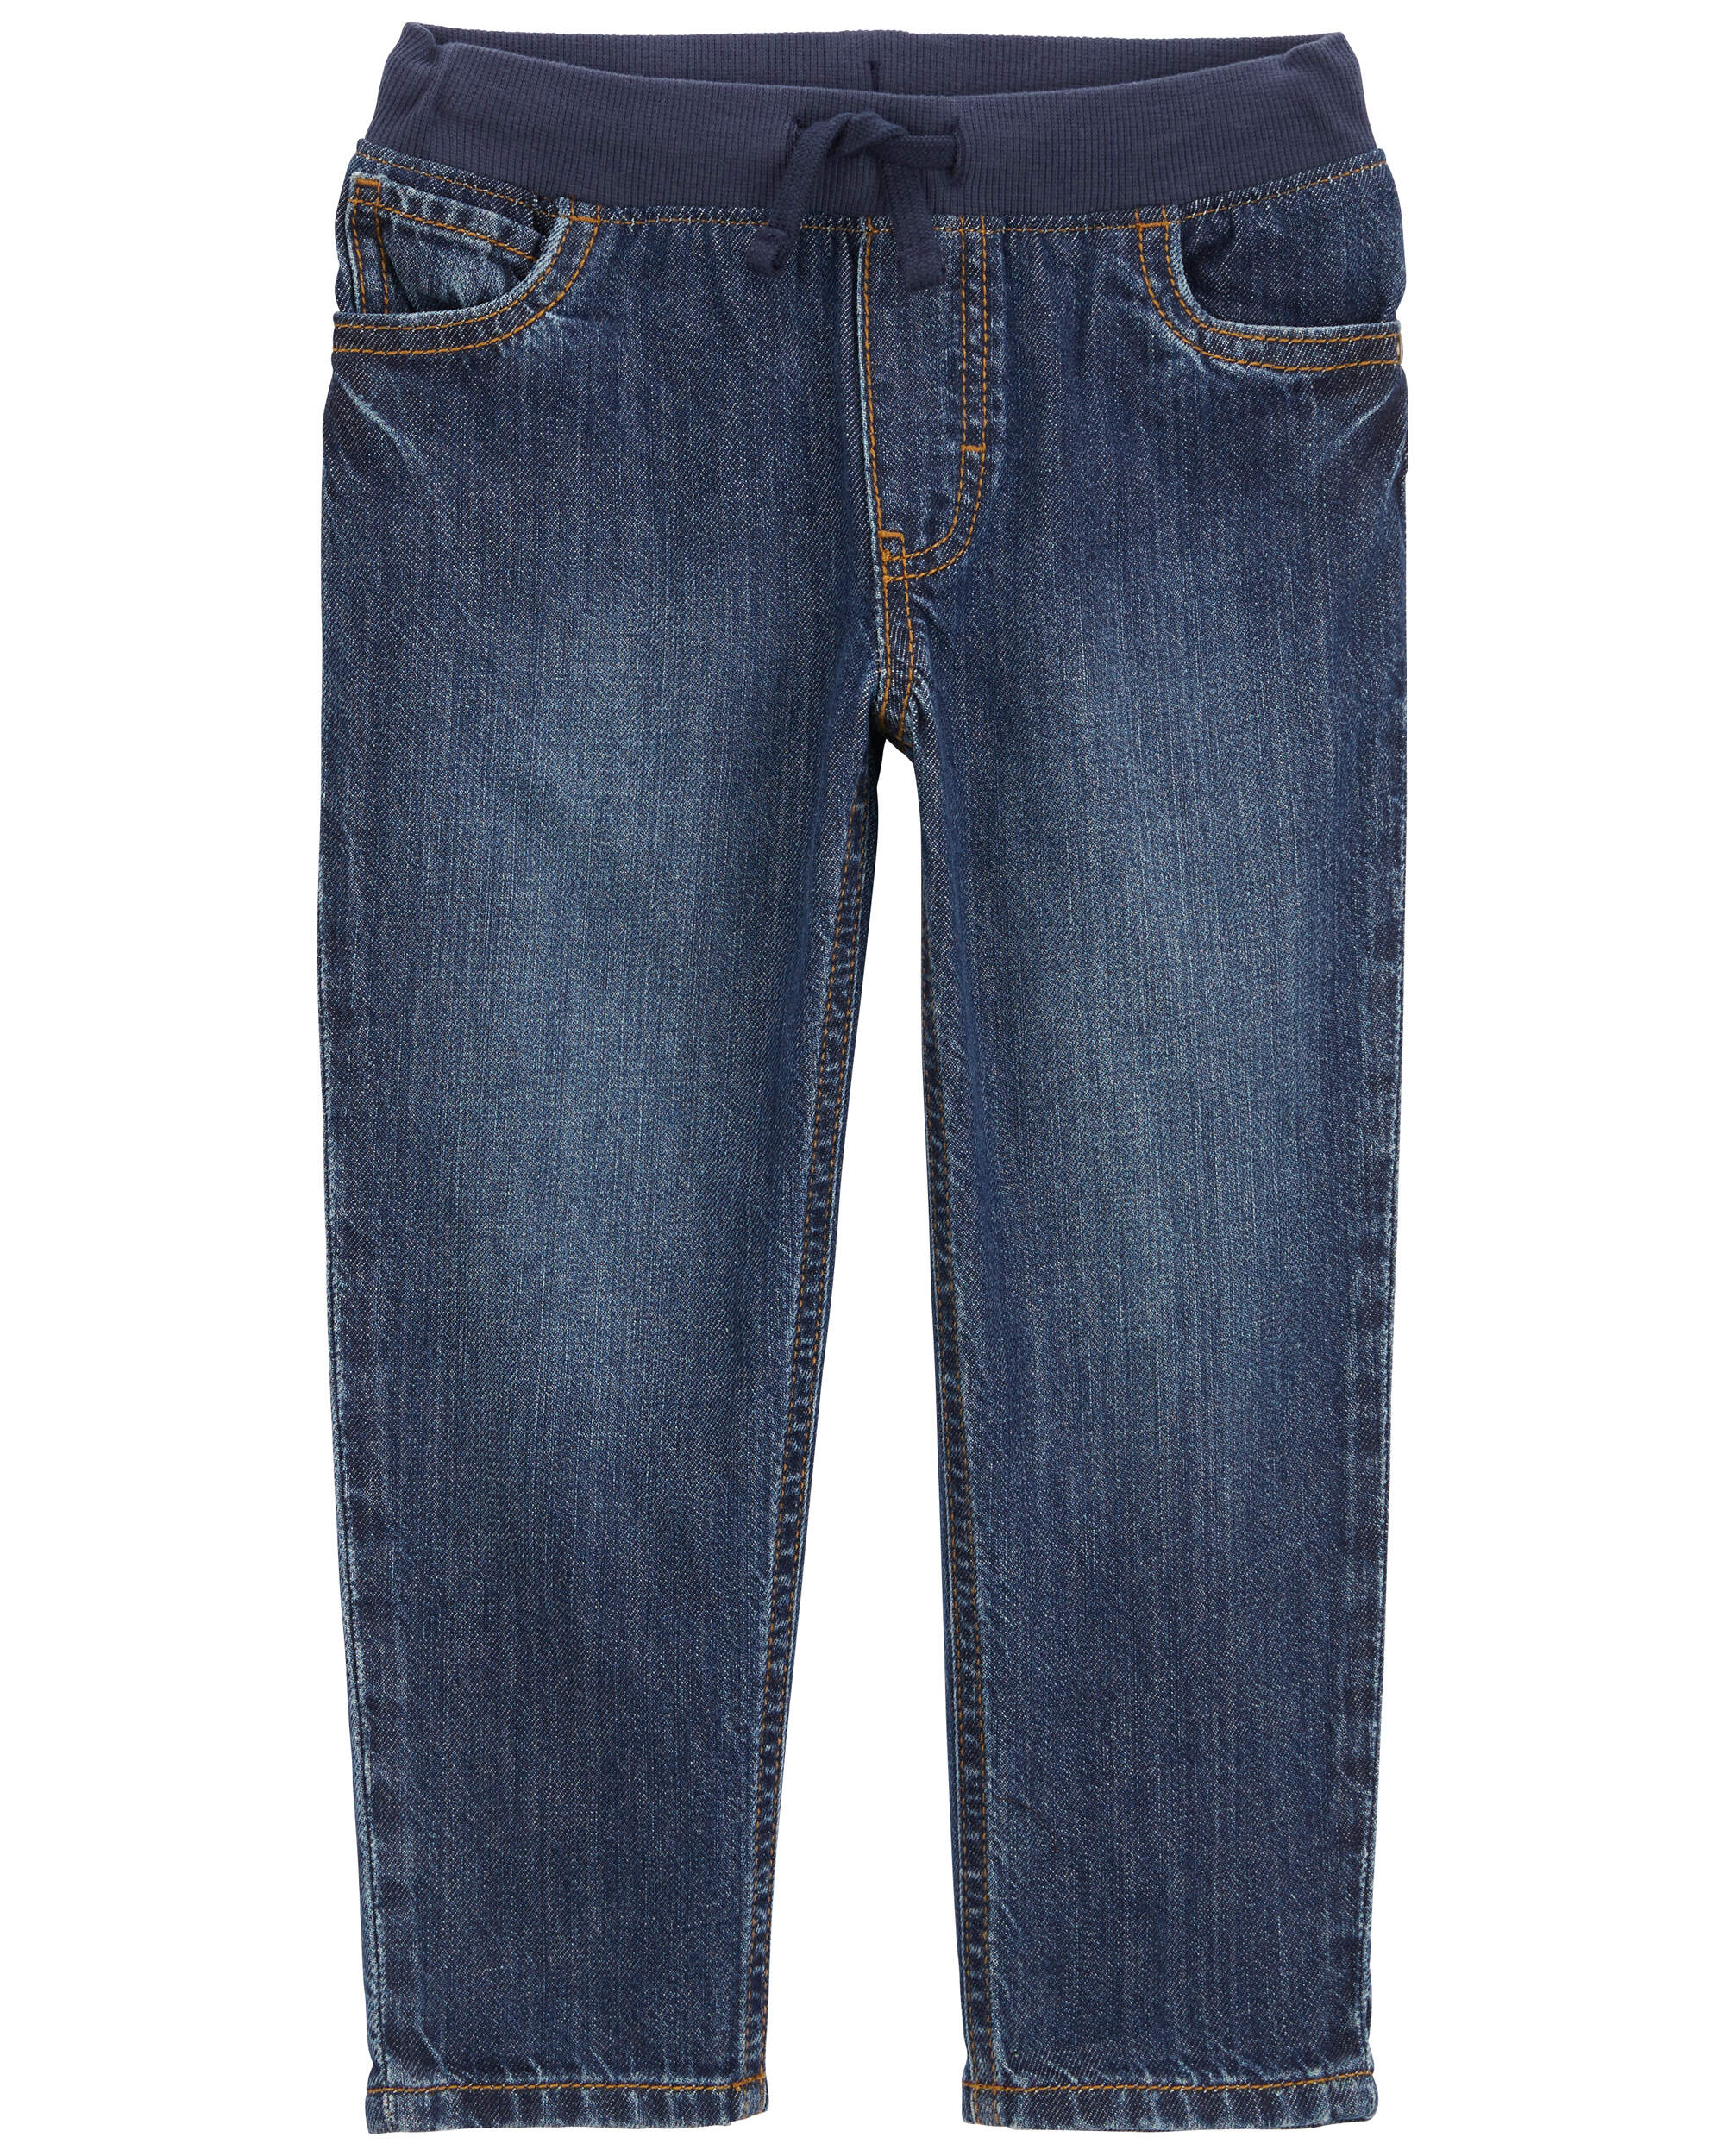 Toddler Pull-On Jeans